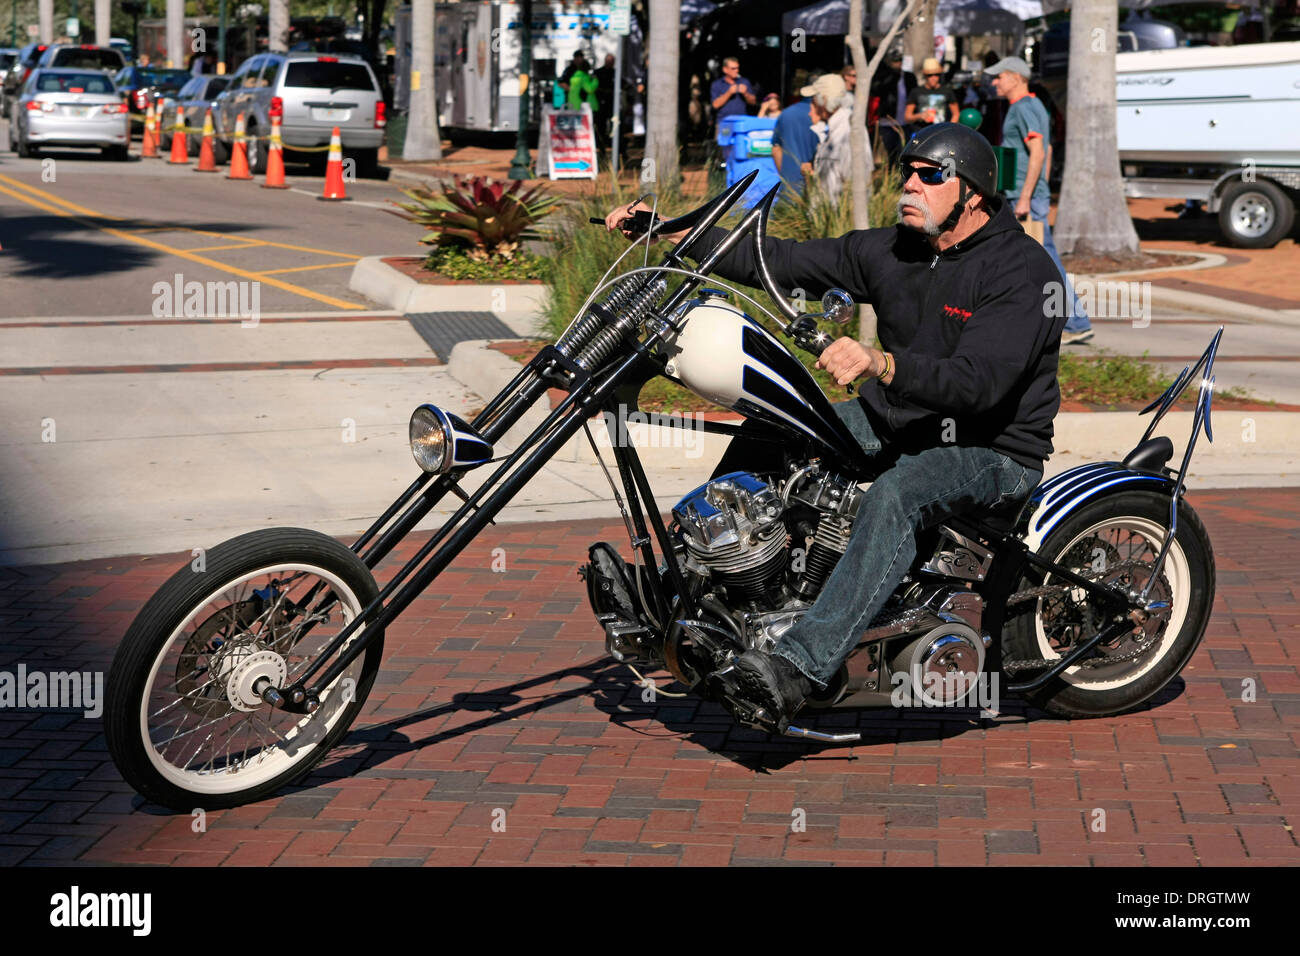 Thunder by the Bay motorcycle event in Sarasota Florida Stock Photo